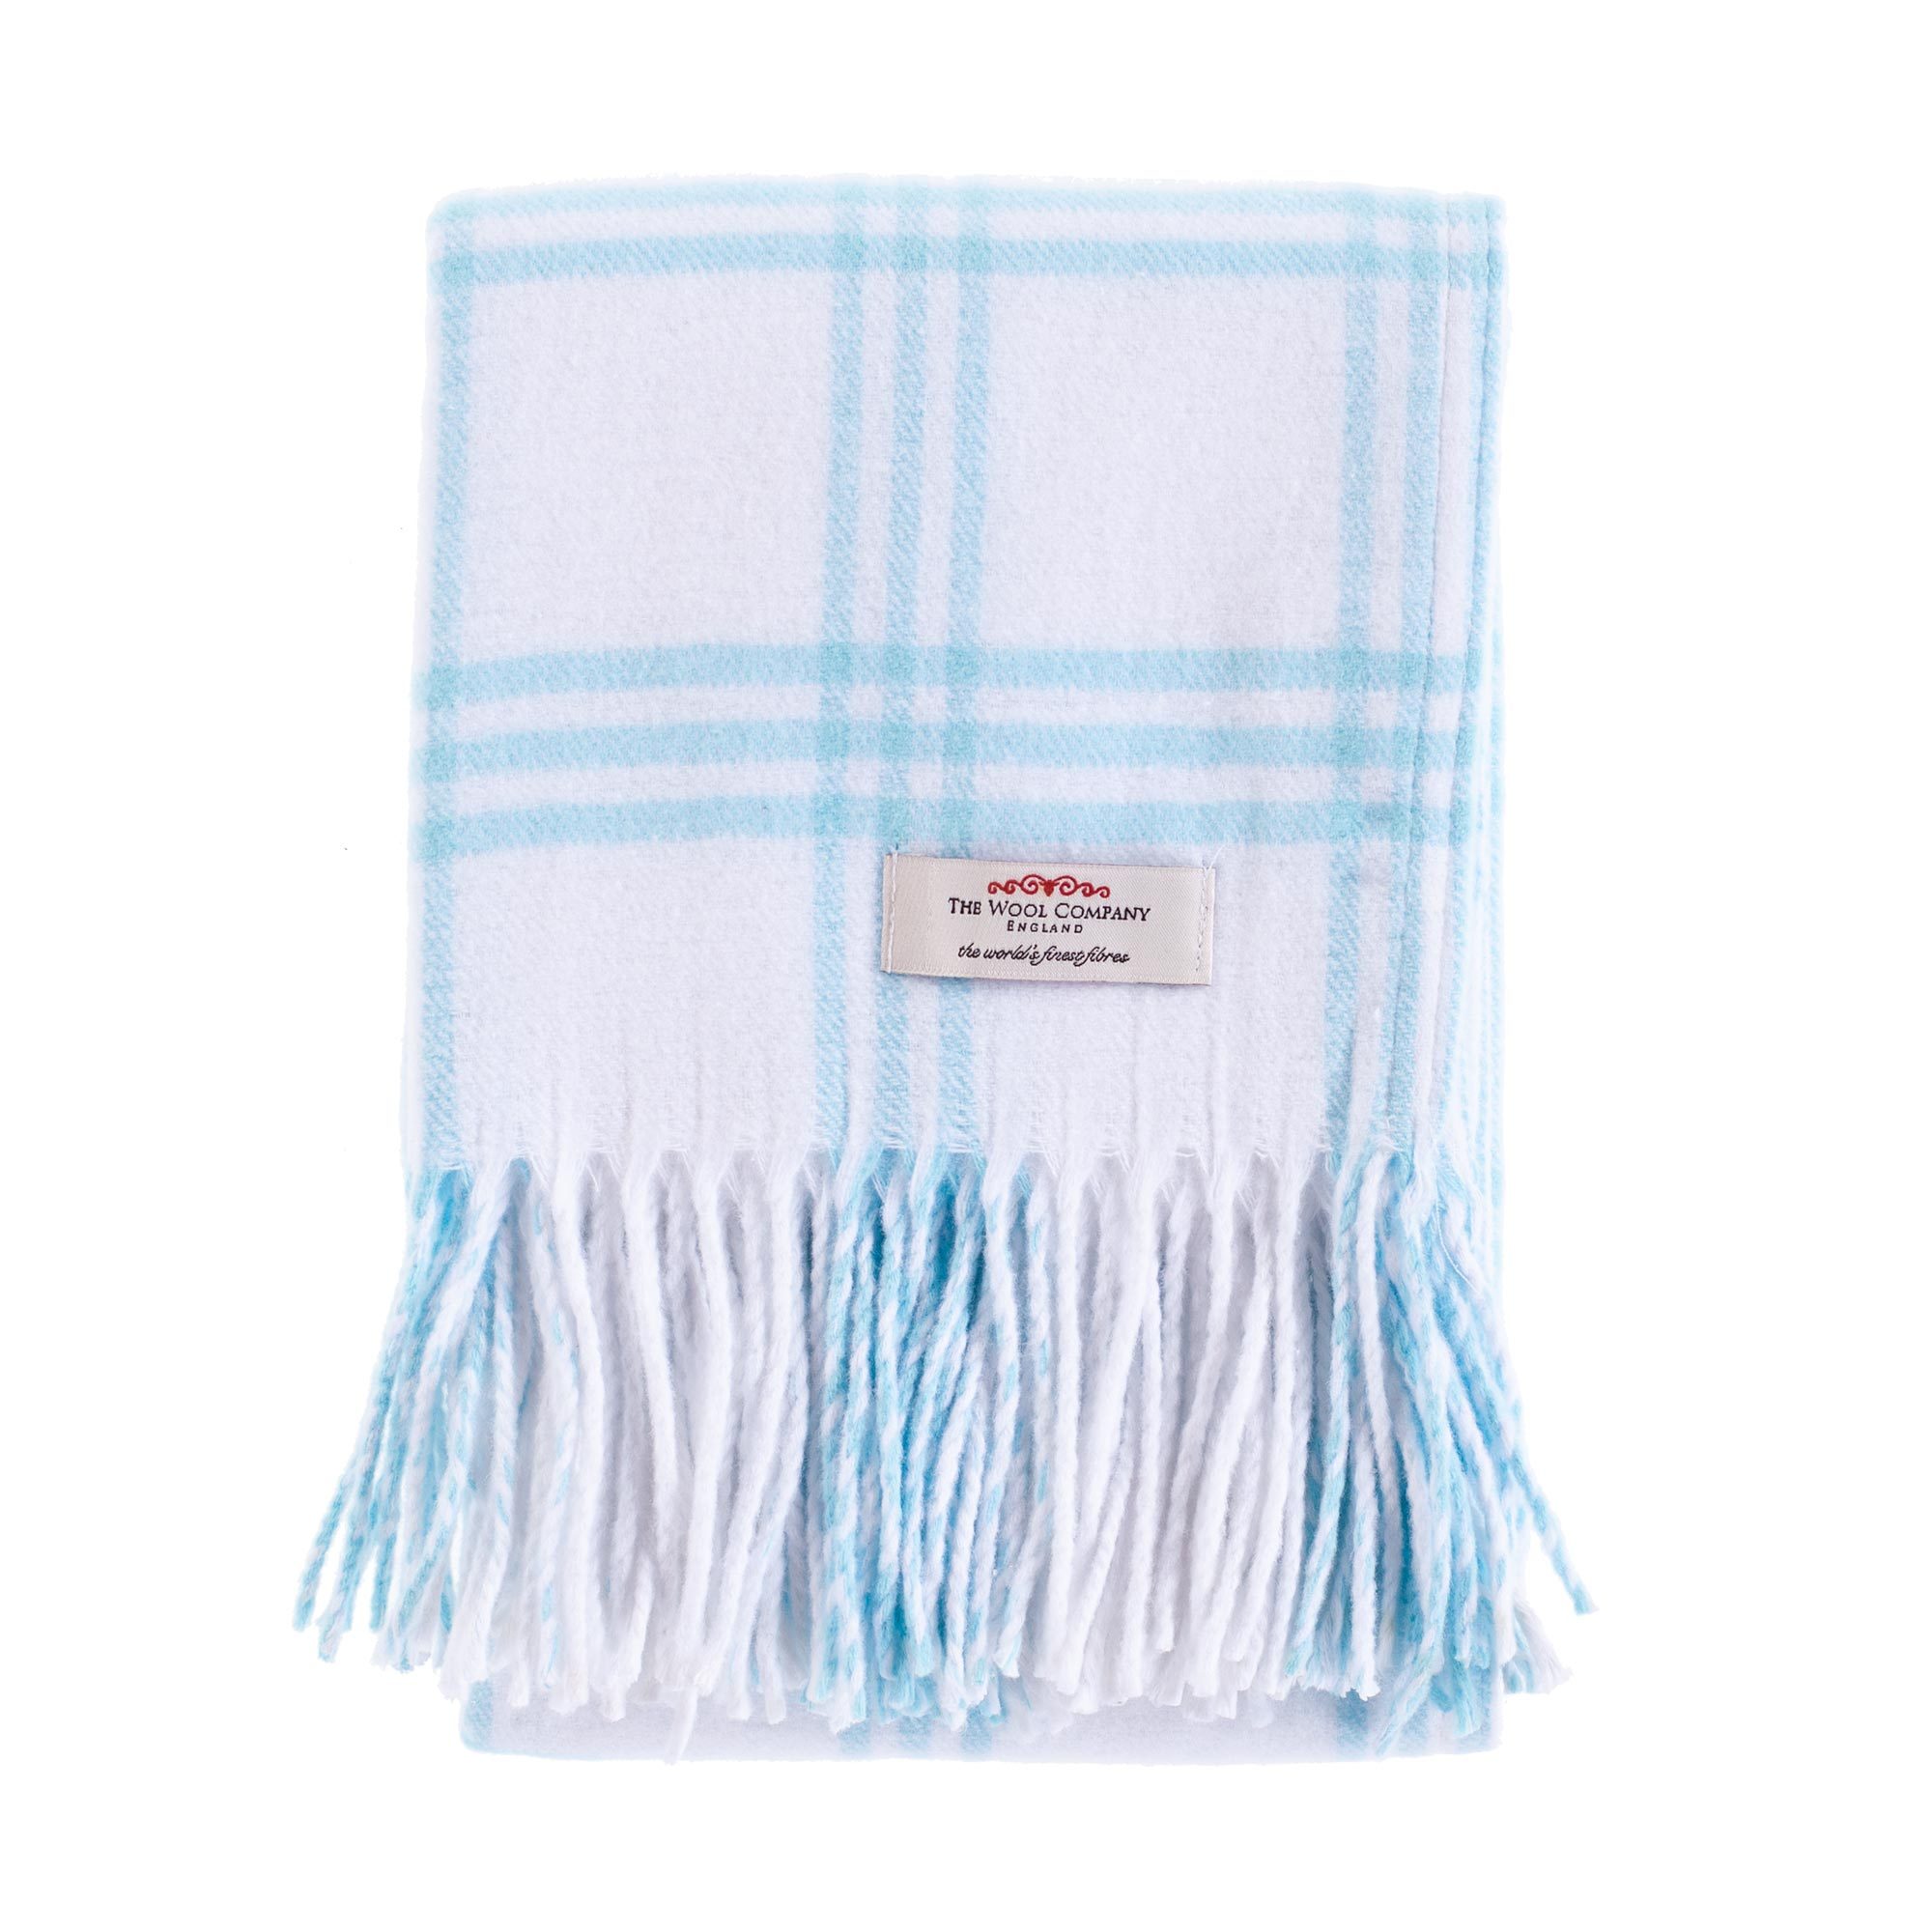 Softest Cotton Baby Blankets Blue White Check The Wool Company